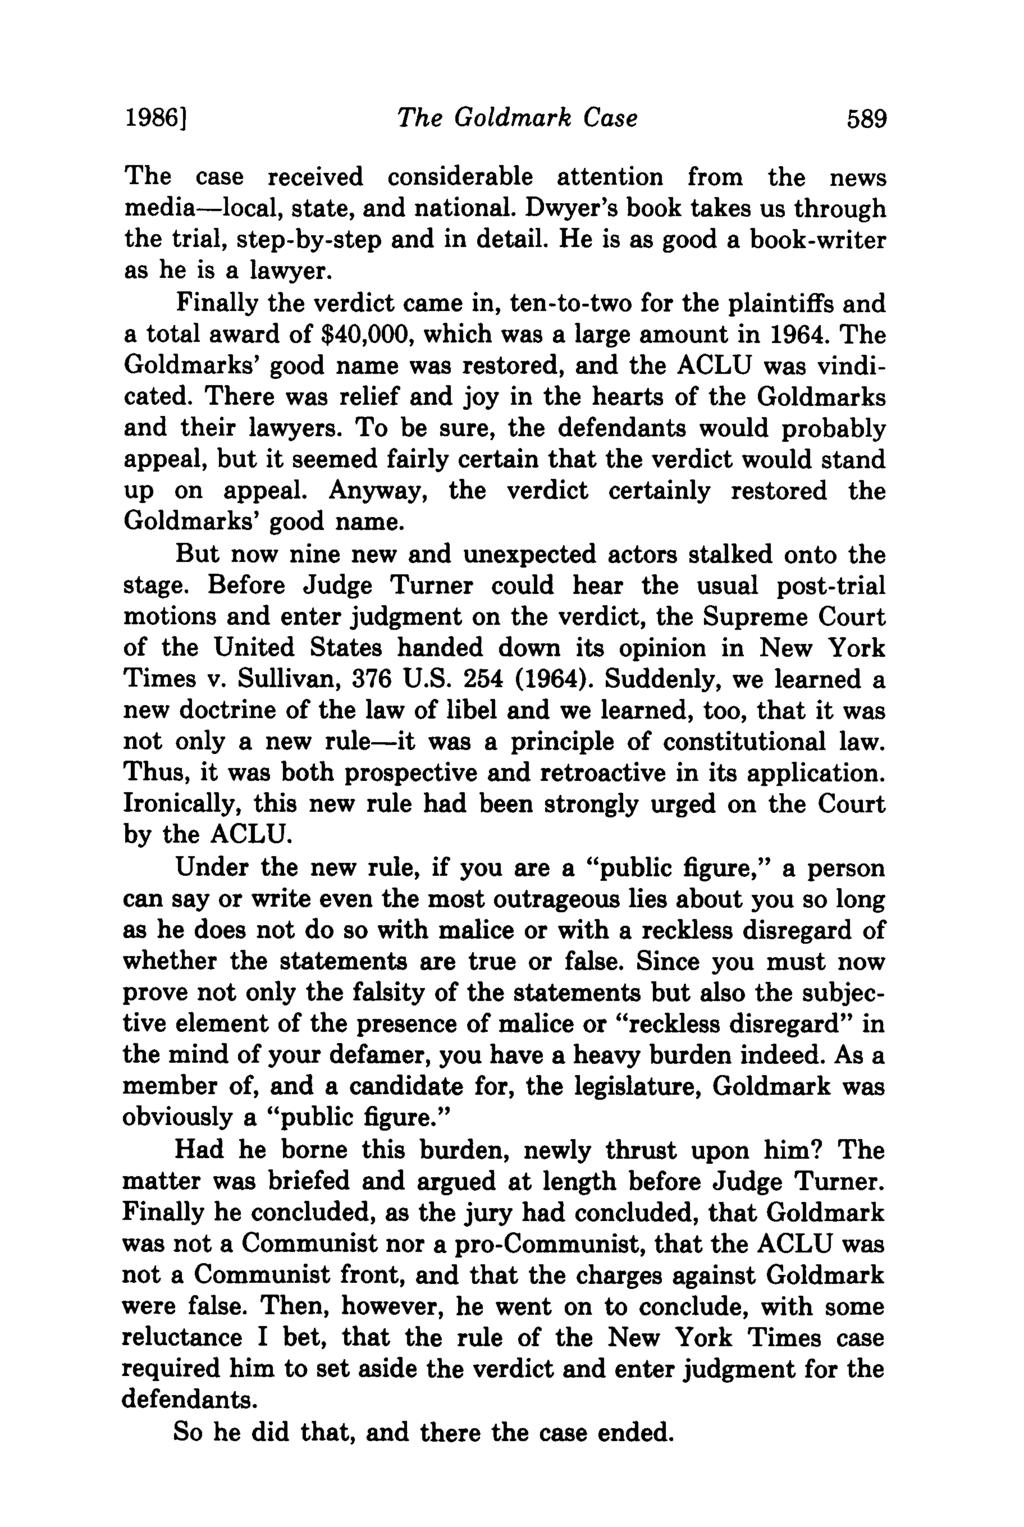 1986] The Goldmark Case 589 The case received considerable attention from the news media-local, state, and national. Dwyer's book takes us through the trial, step-by-step and in detail.